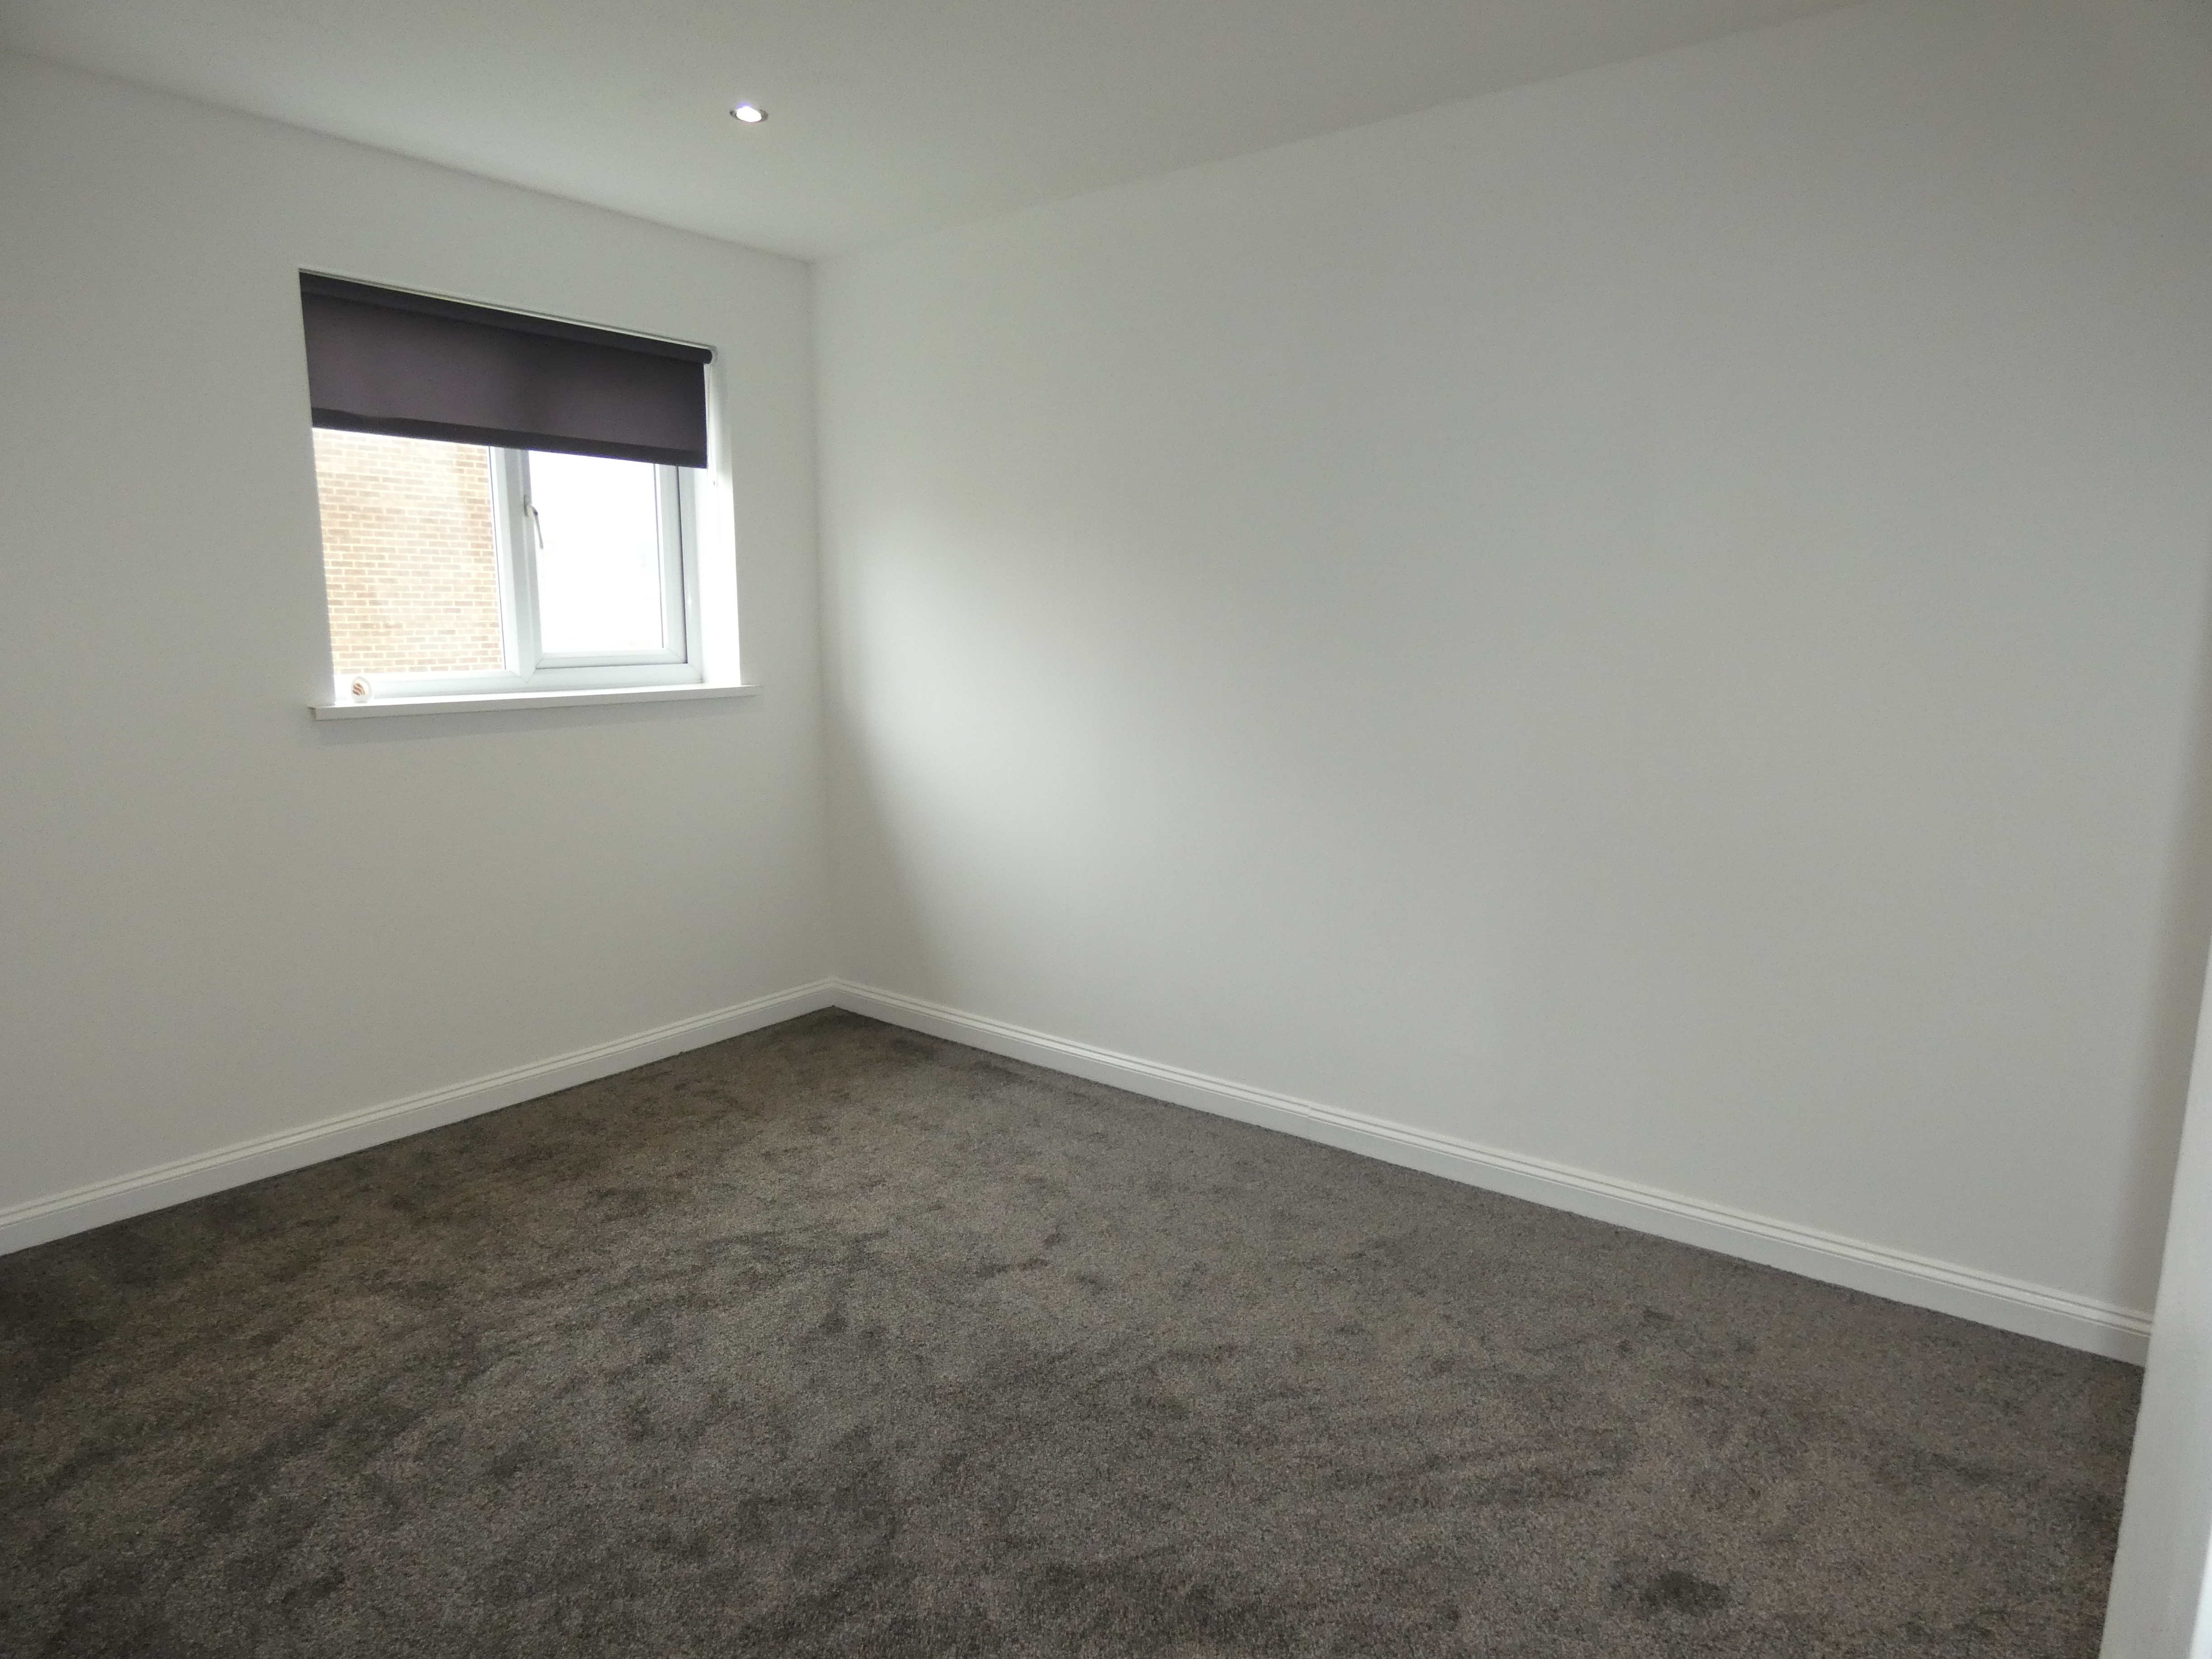 2 bed flat to rent in Wooler Green, Newcastle upon tyne  - Property Image 11